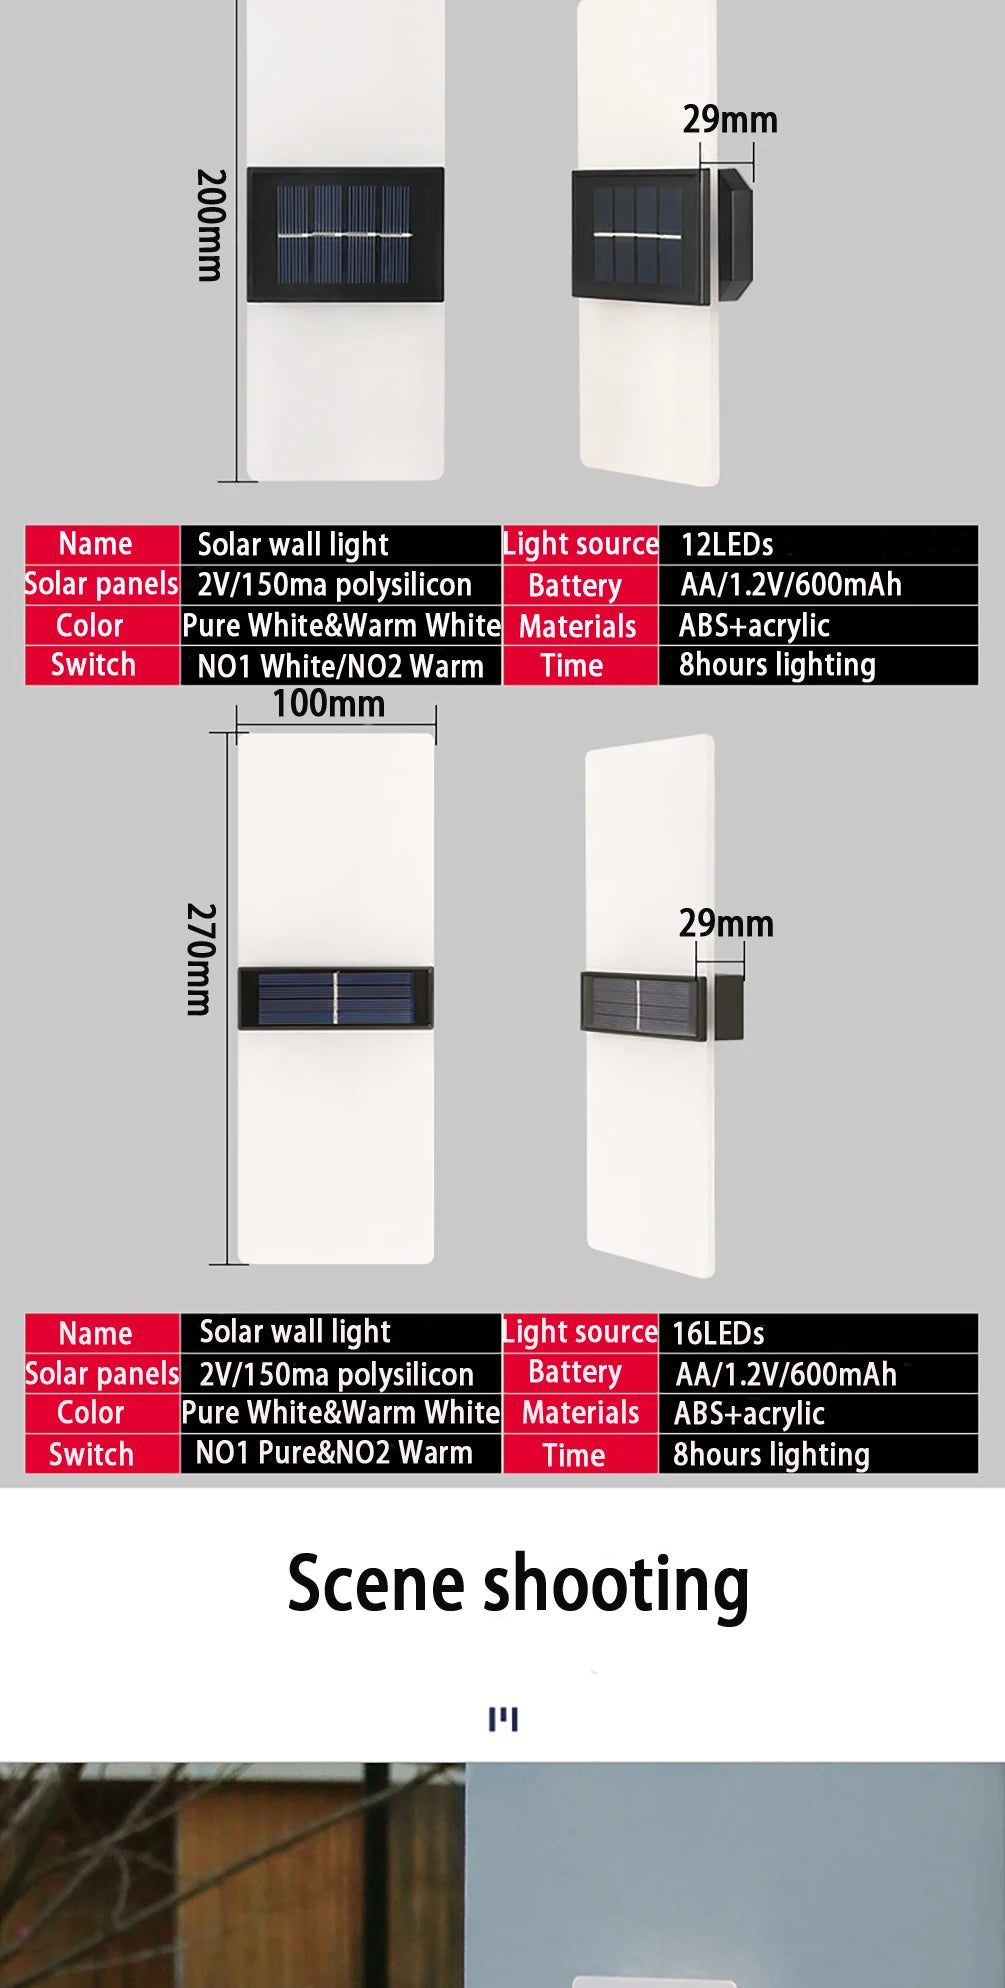 LED Solar Wall Light, Solar-powered wall light with LED lights, waterproof, and automatic shut-off.